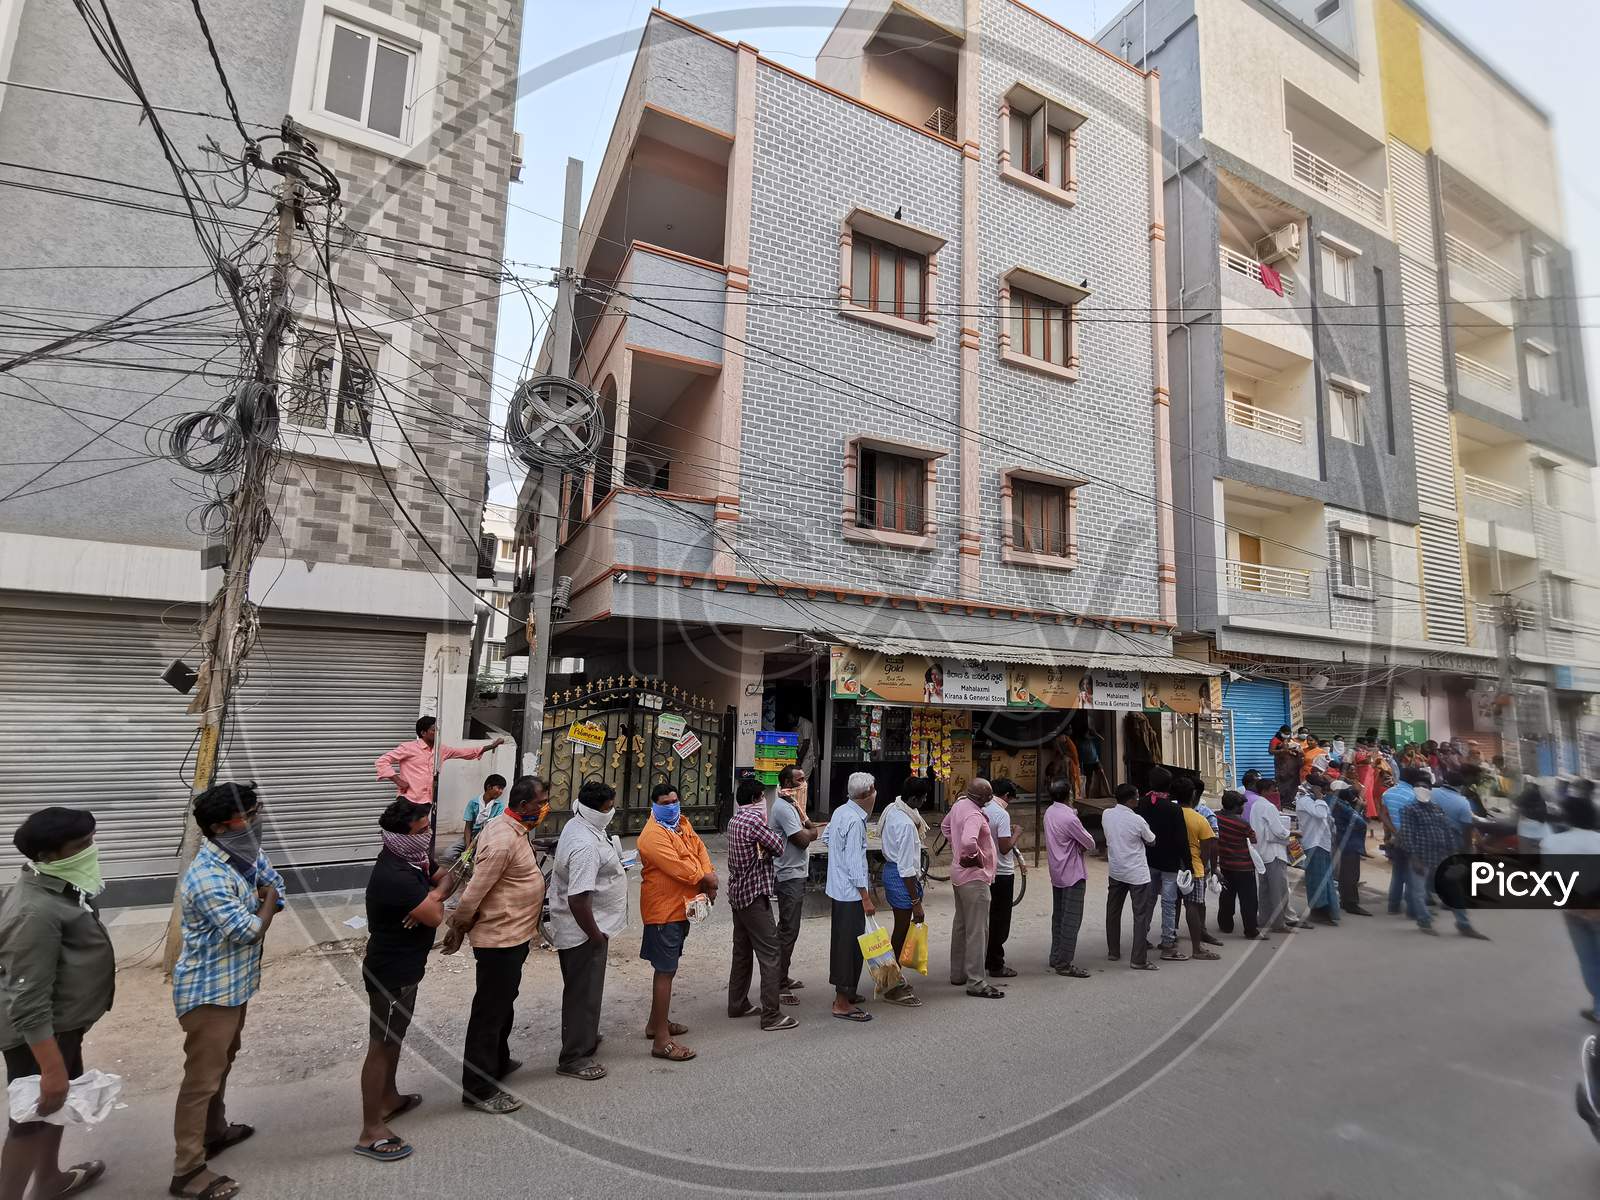 People lined up in queue for Ration